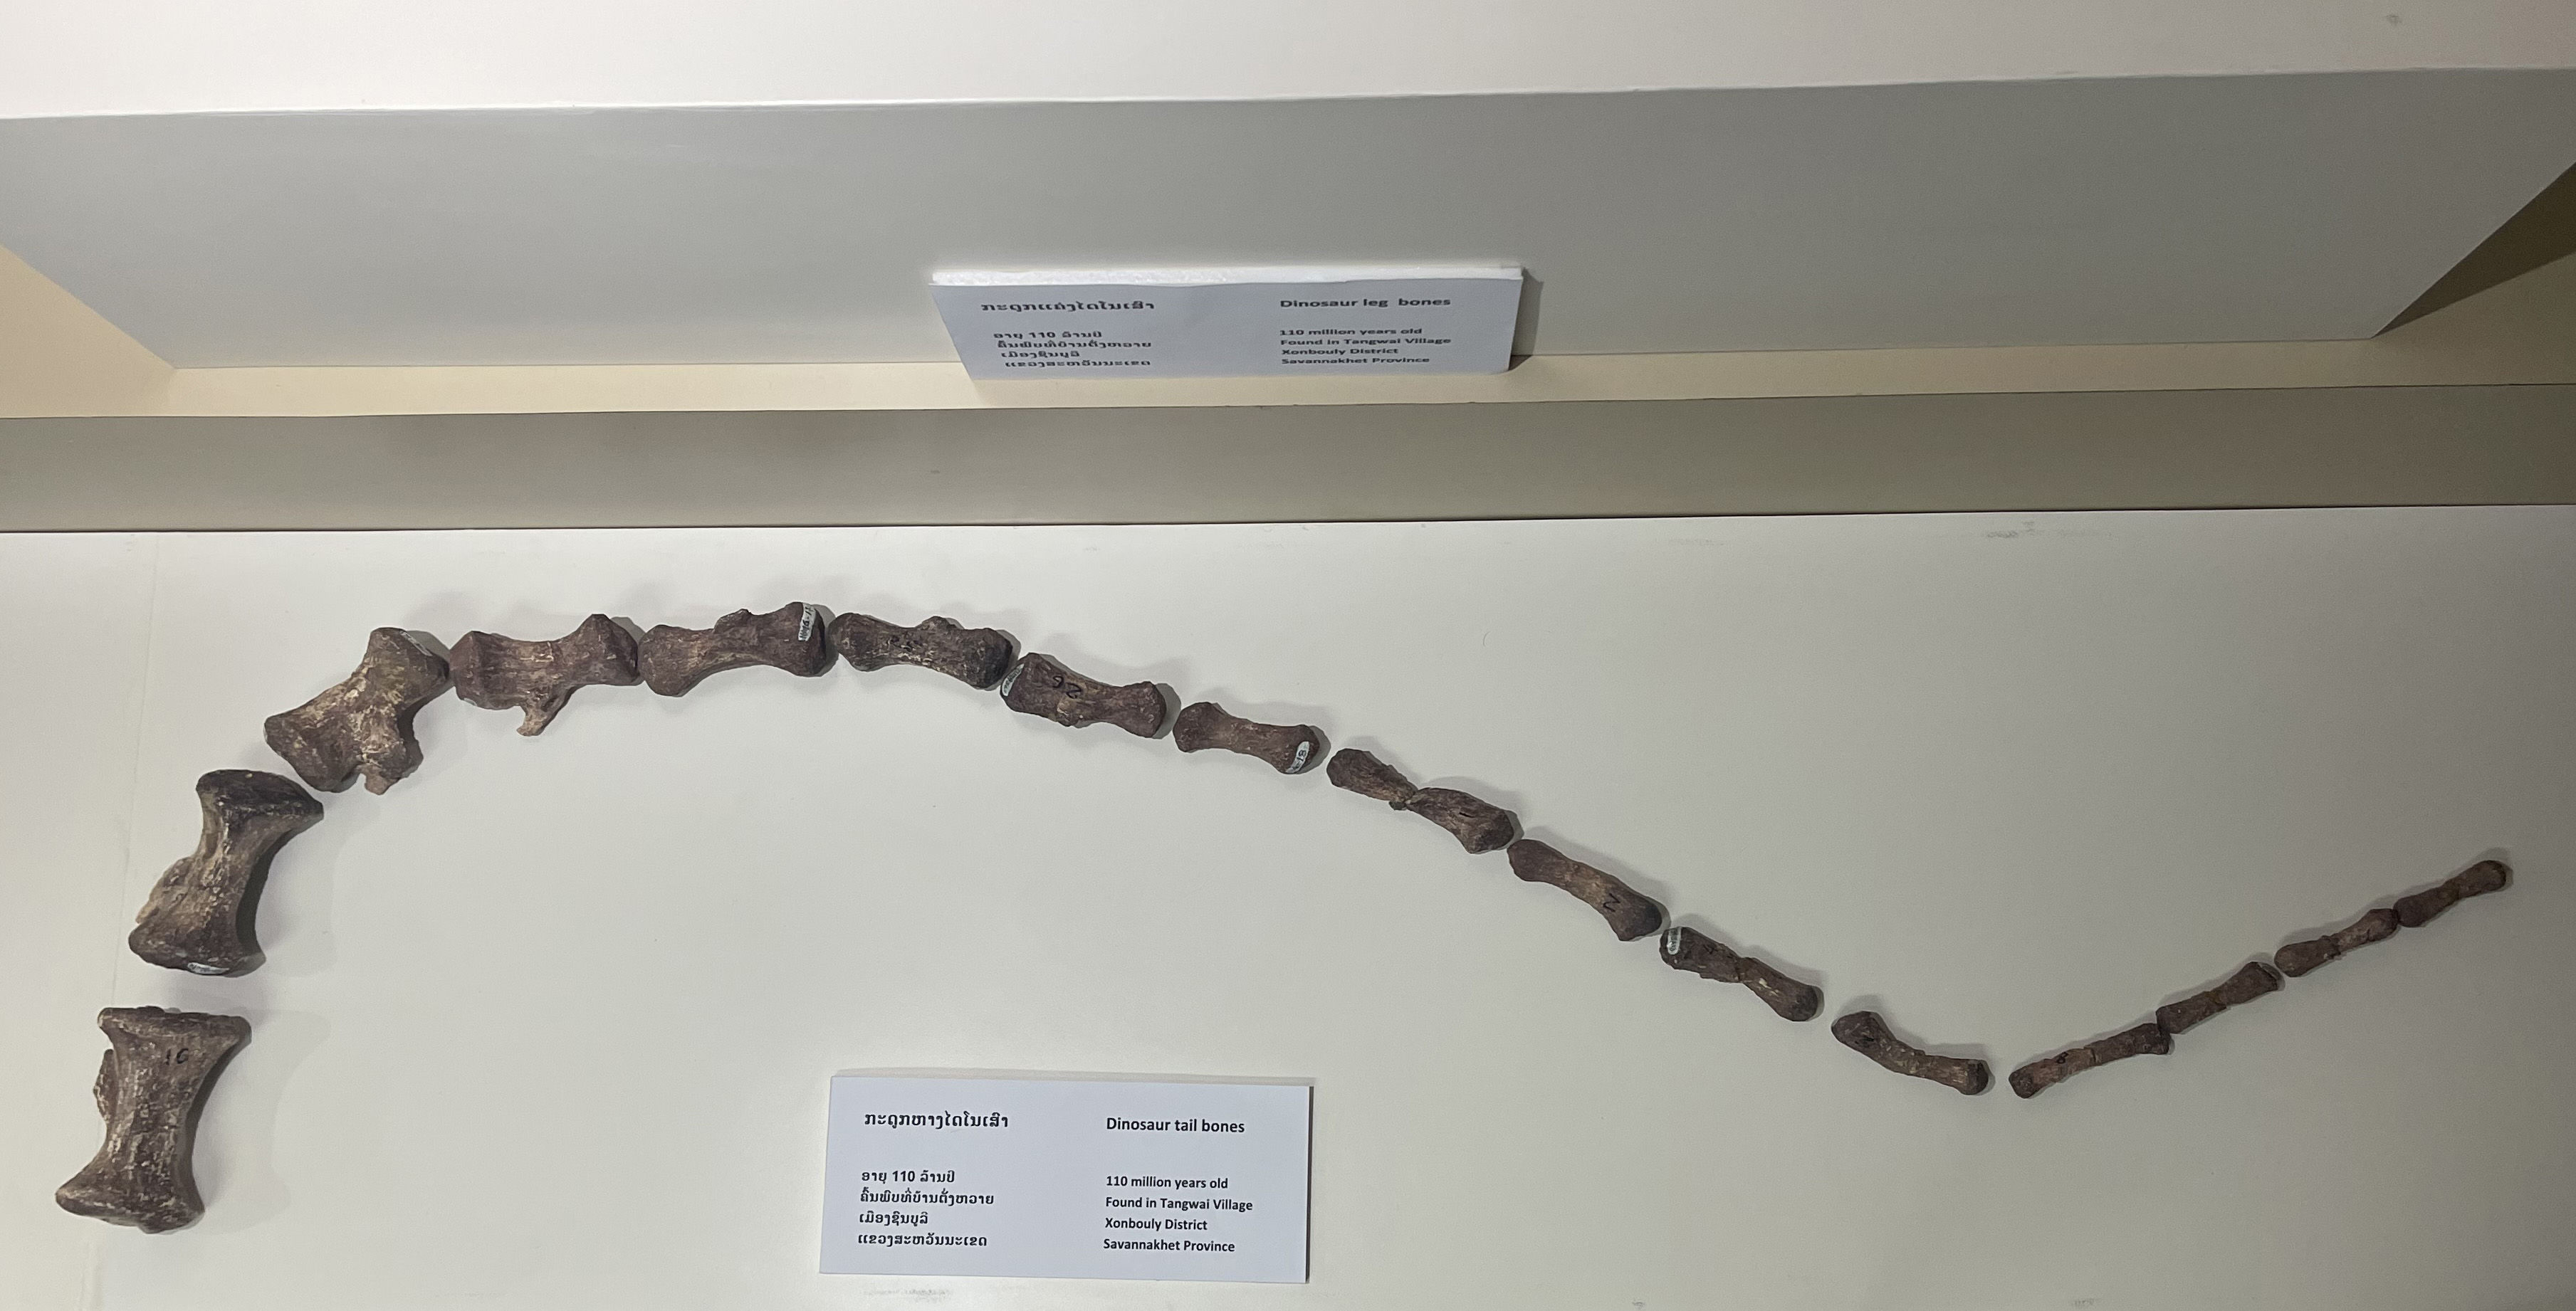 Fossils of a dinosaur’s tail